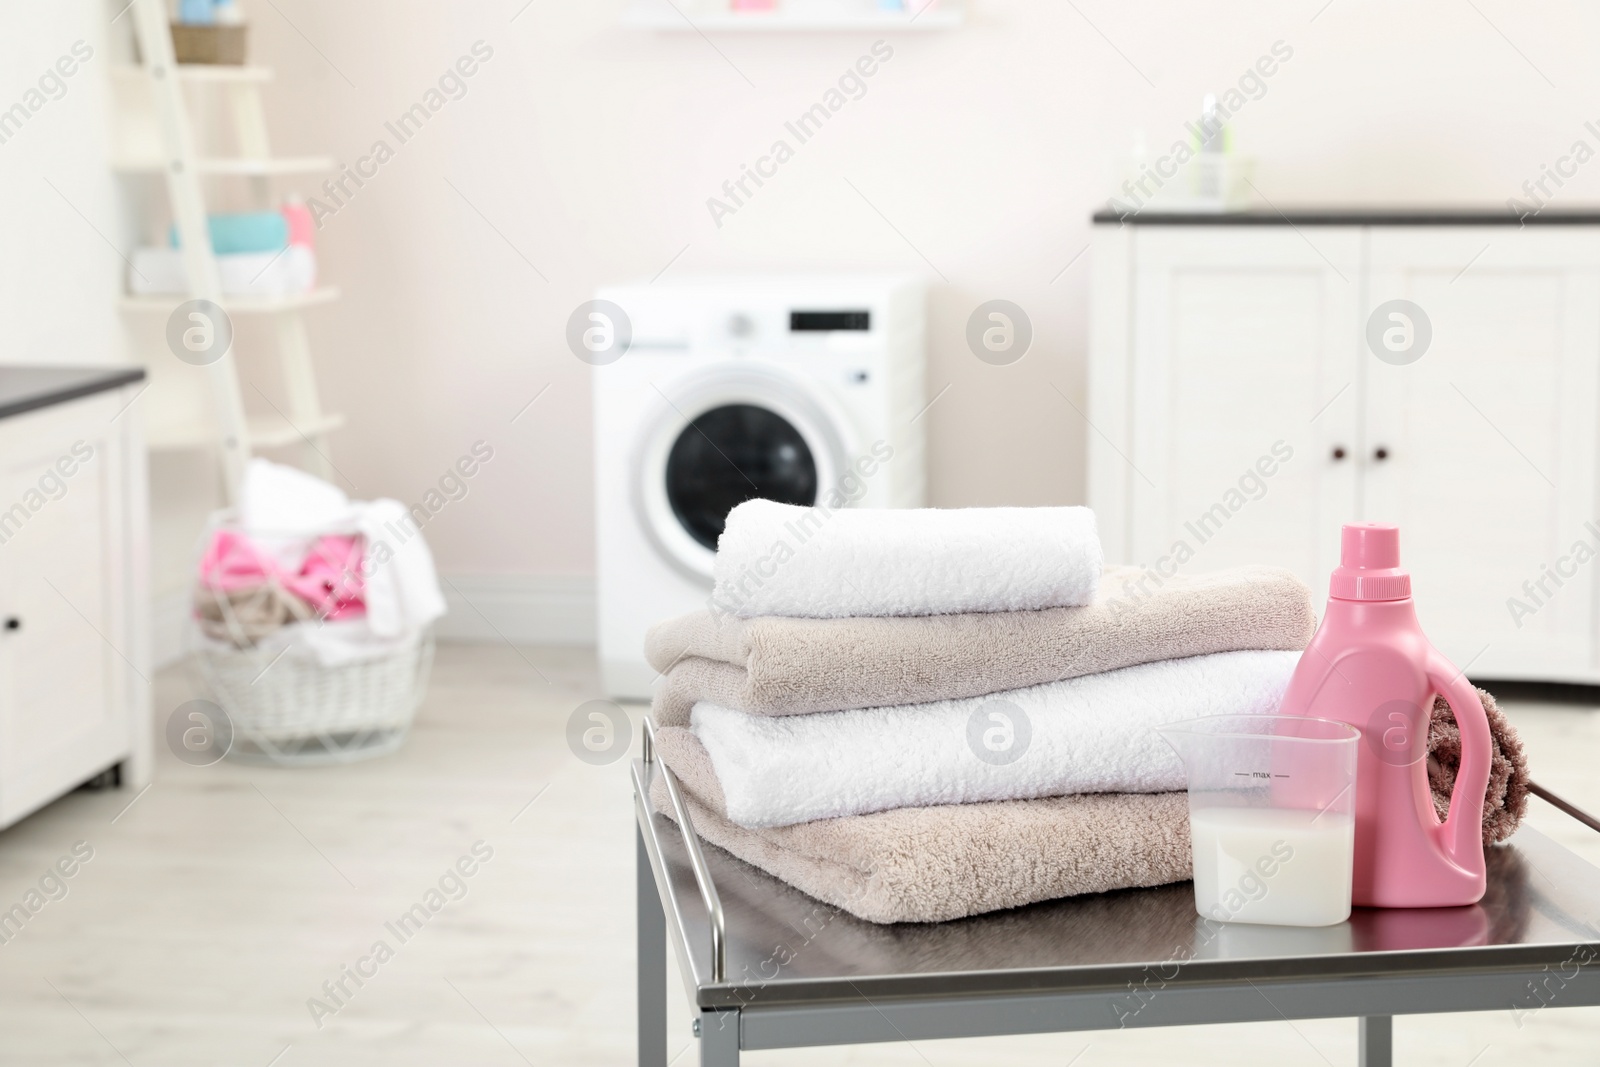 Photo of Soft bath towels and detergent on table against blurred background, space for text